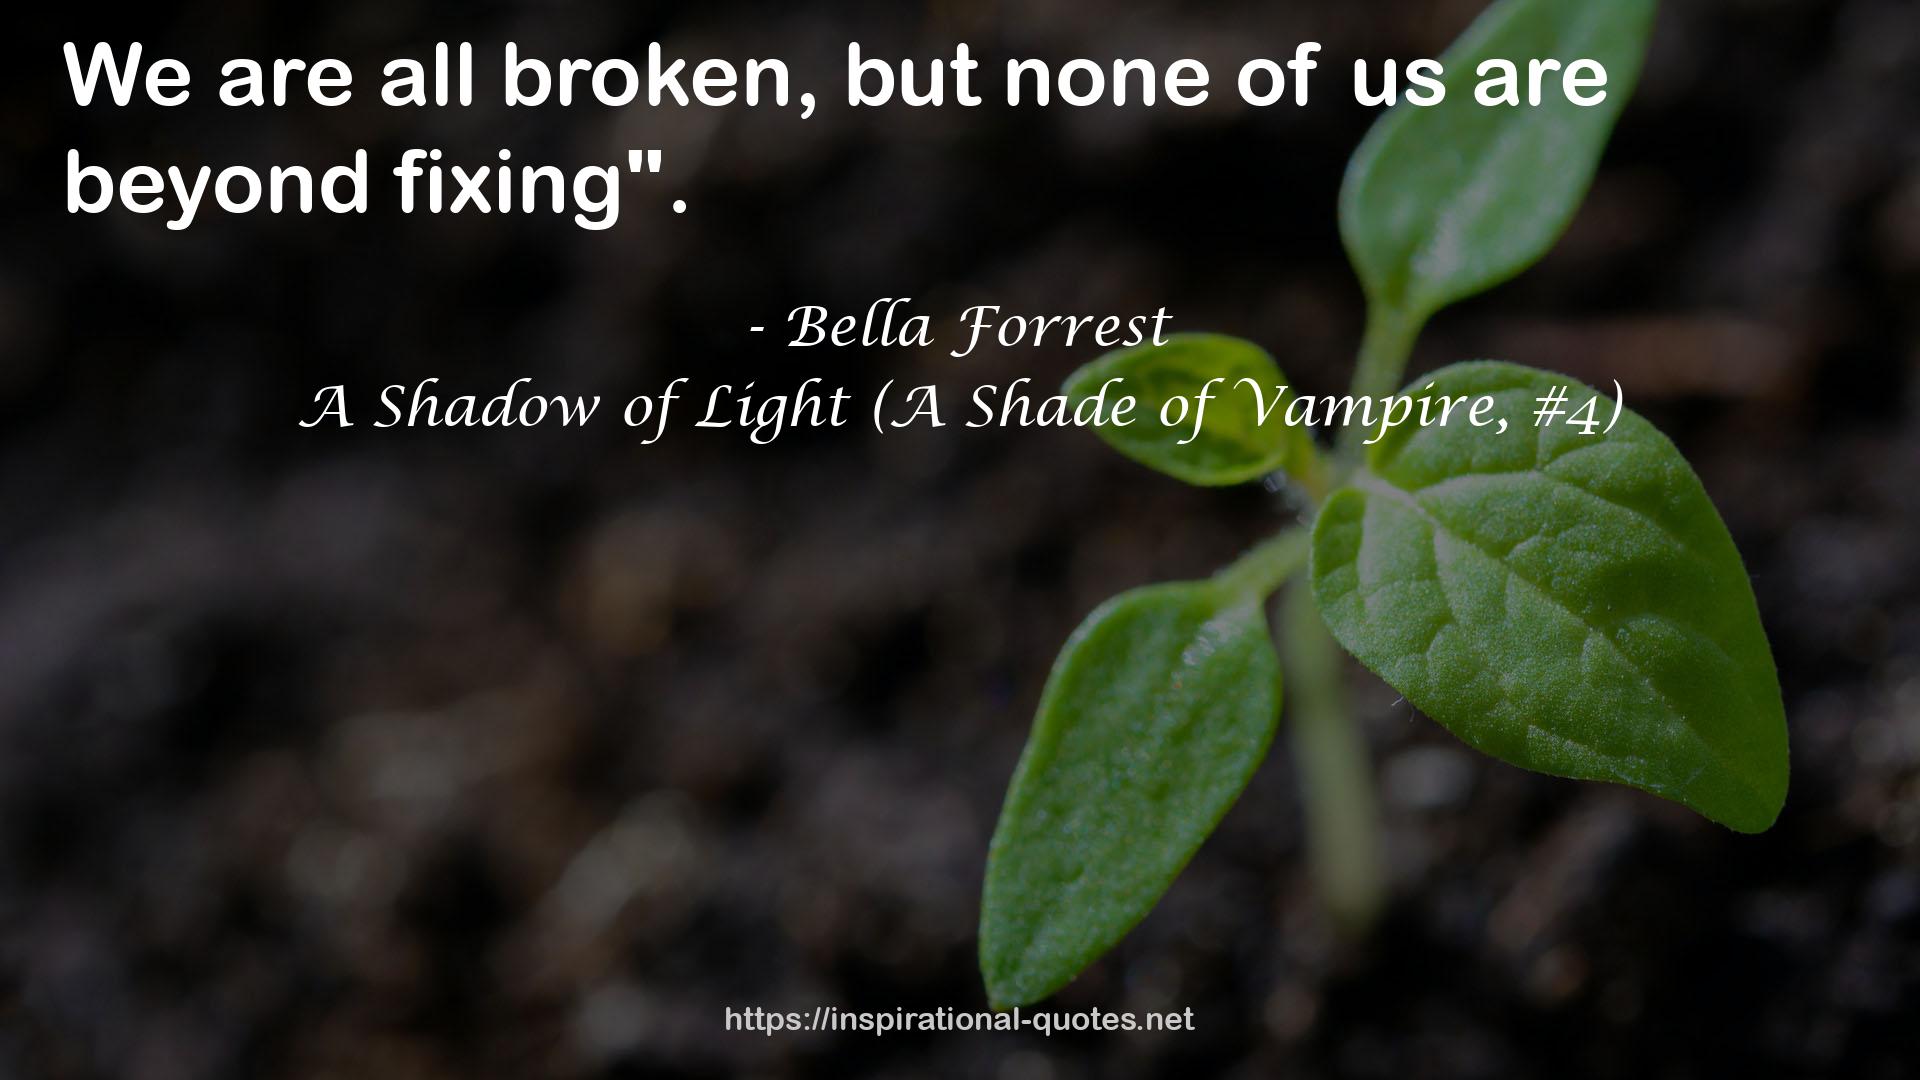 A Shadow of Light (A Shade of Vampire, #4) QUOTES